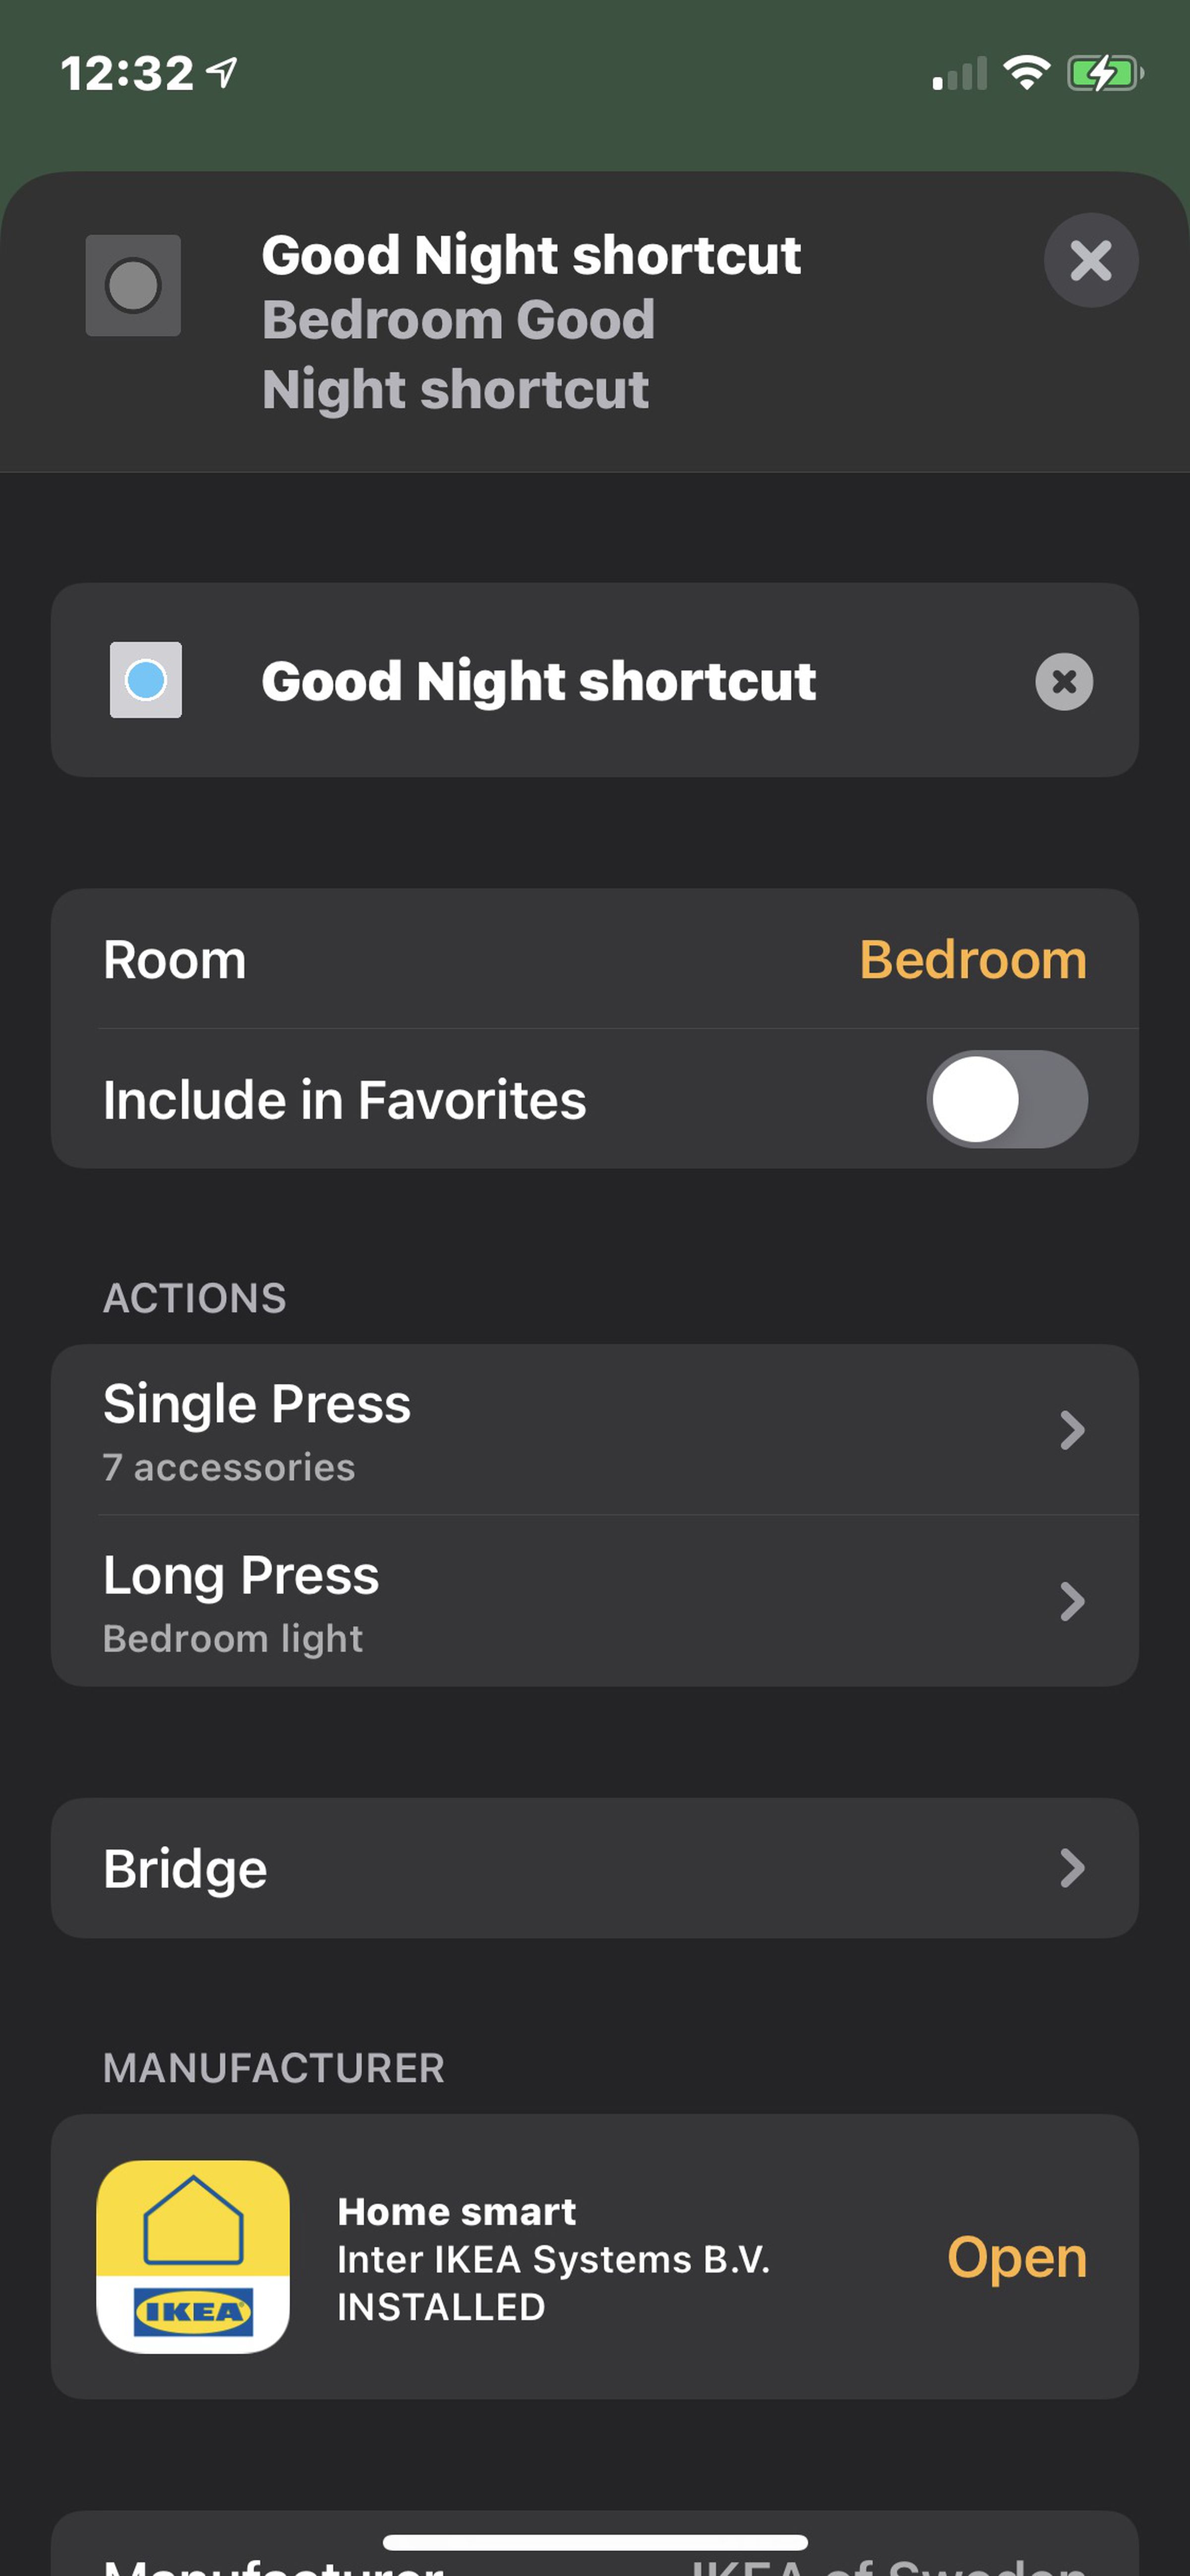 Apple Action assignments for “Good Night” button.